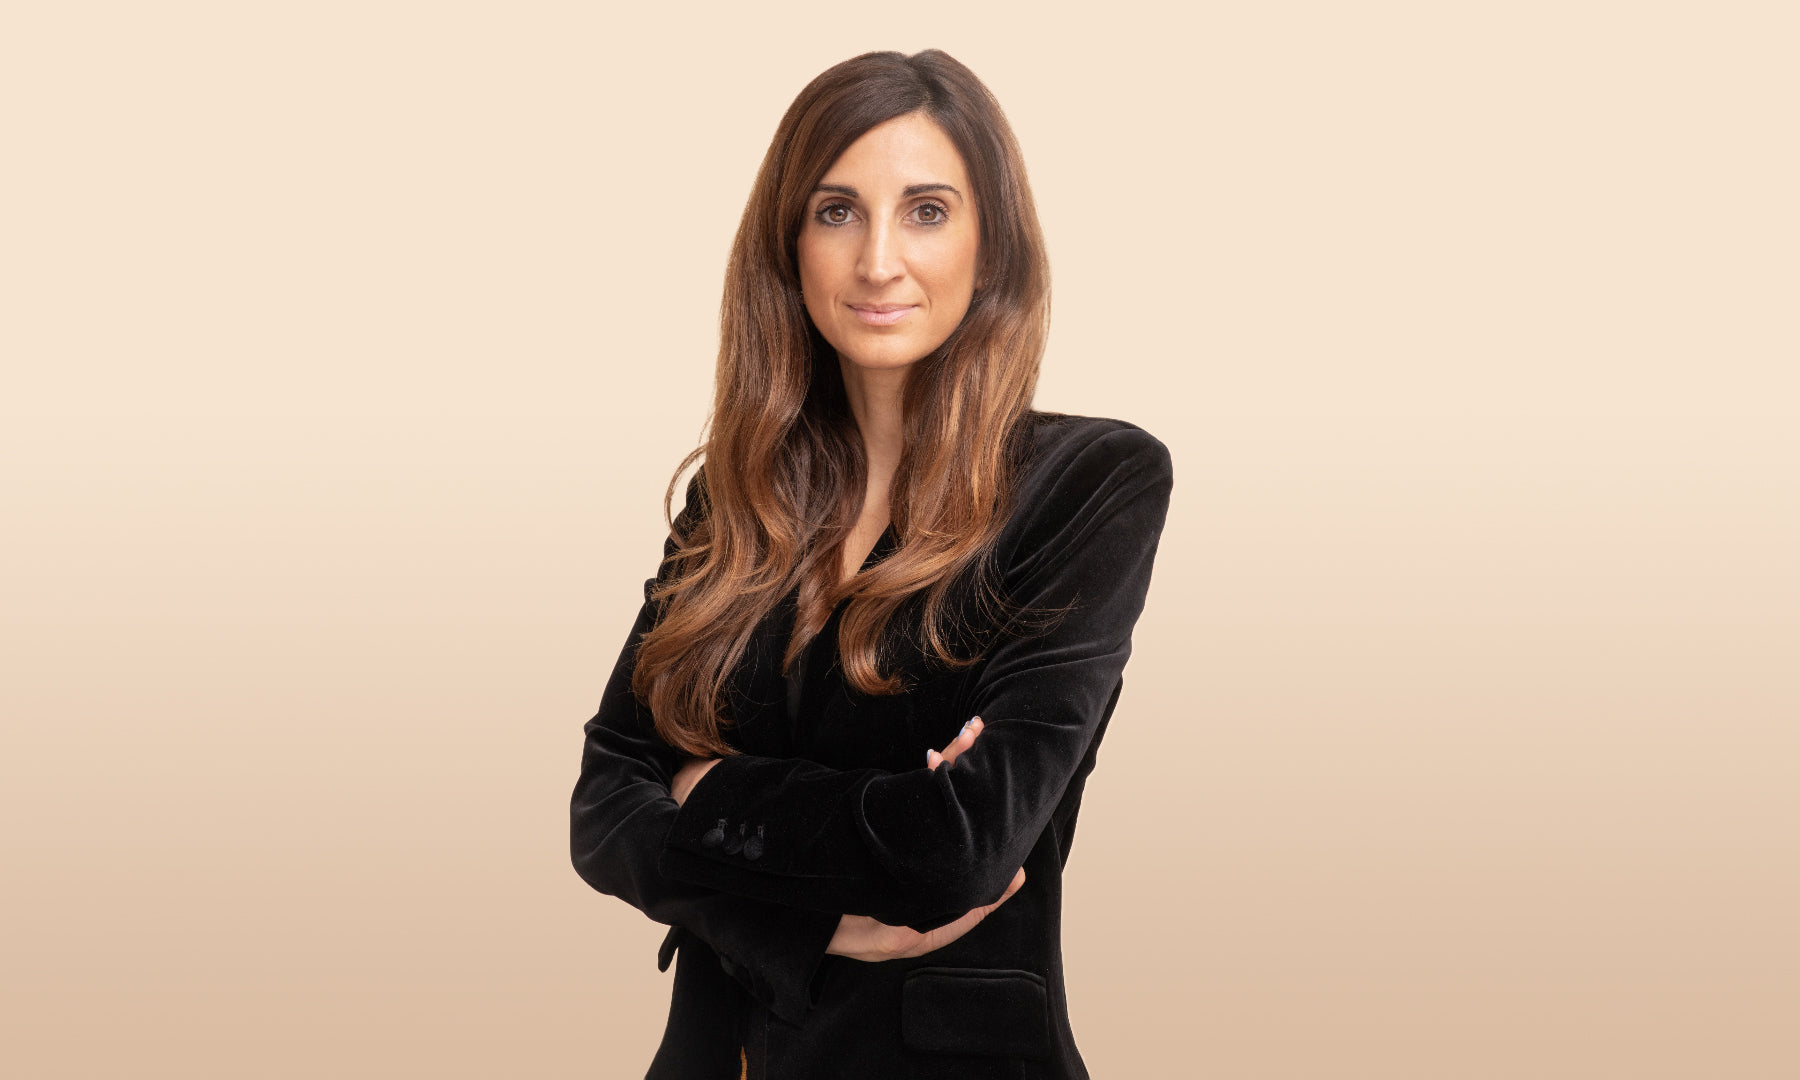 Q&A with Joanna Nicola, Founder & CEO of Tocu